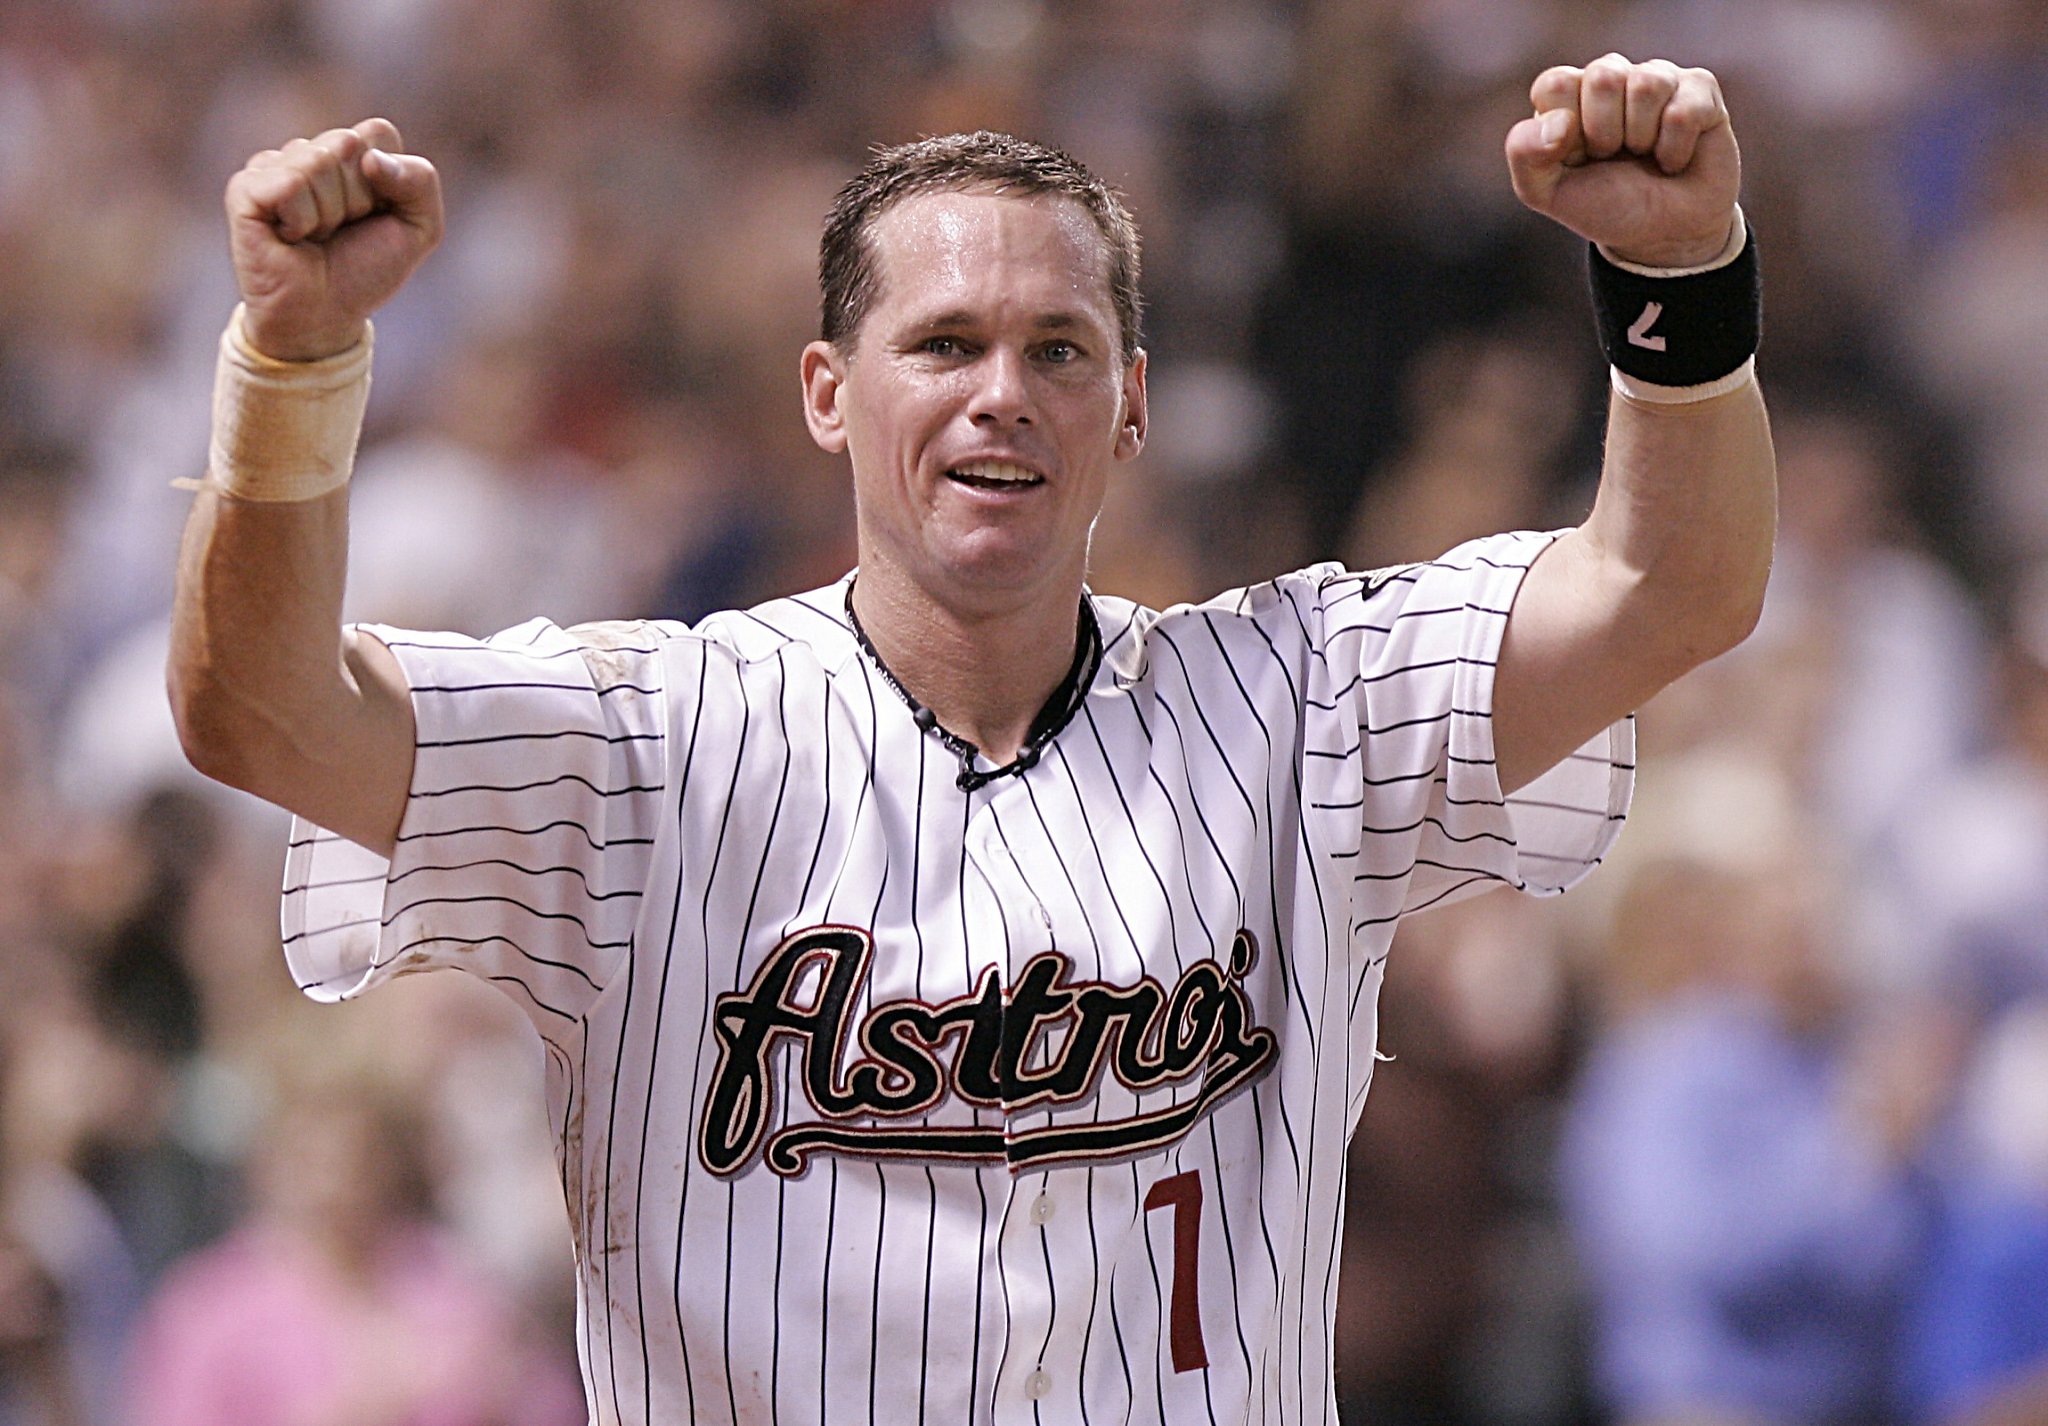 Craig Biggio was sterling player, but not a Hall of Famer